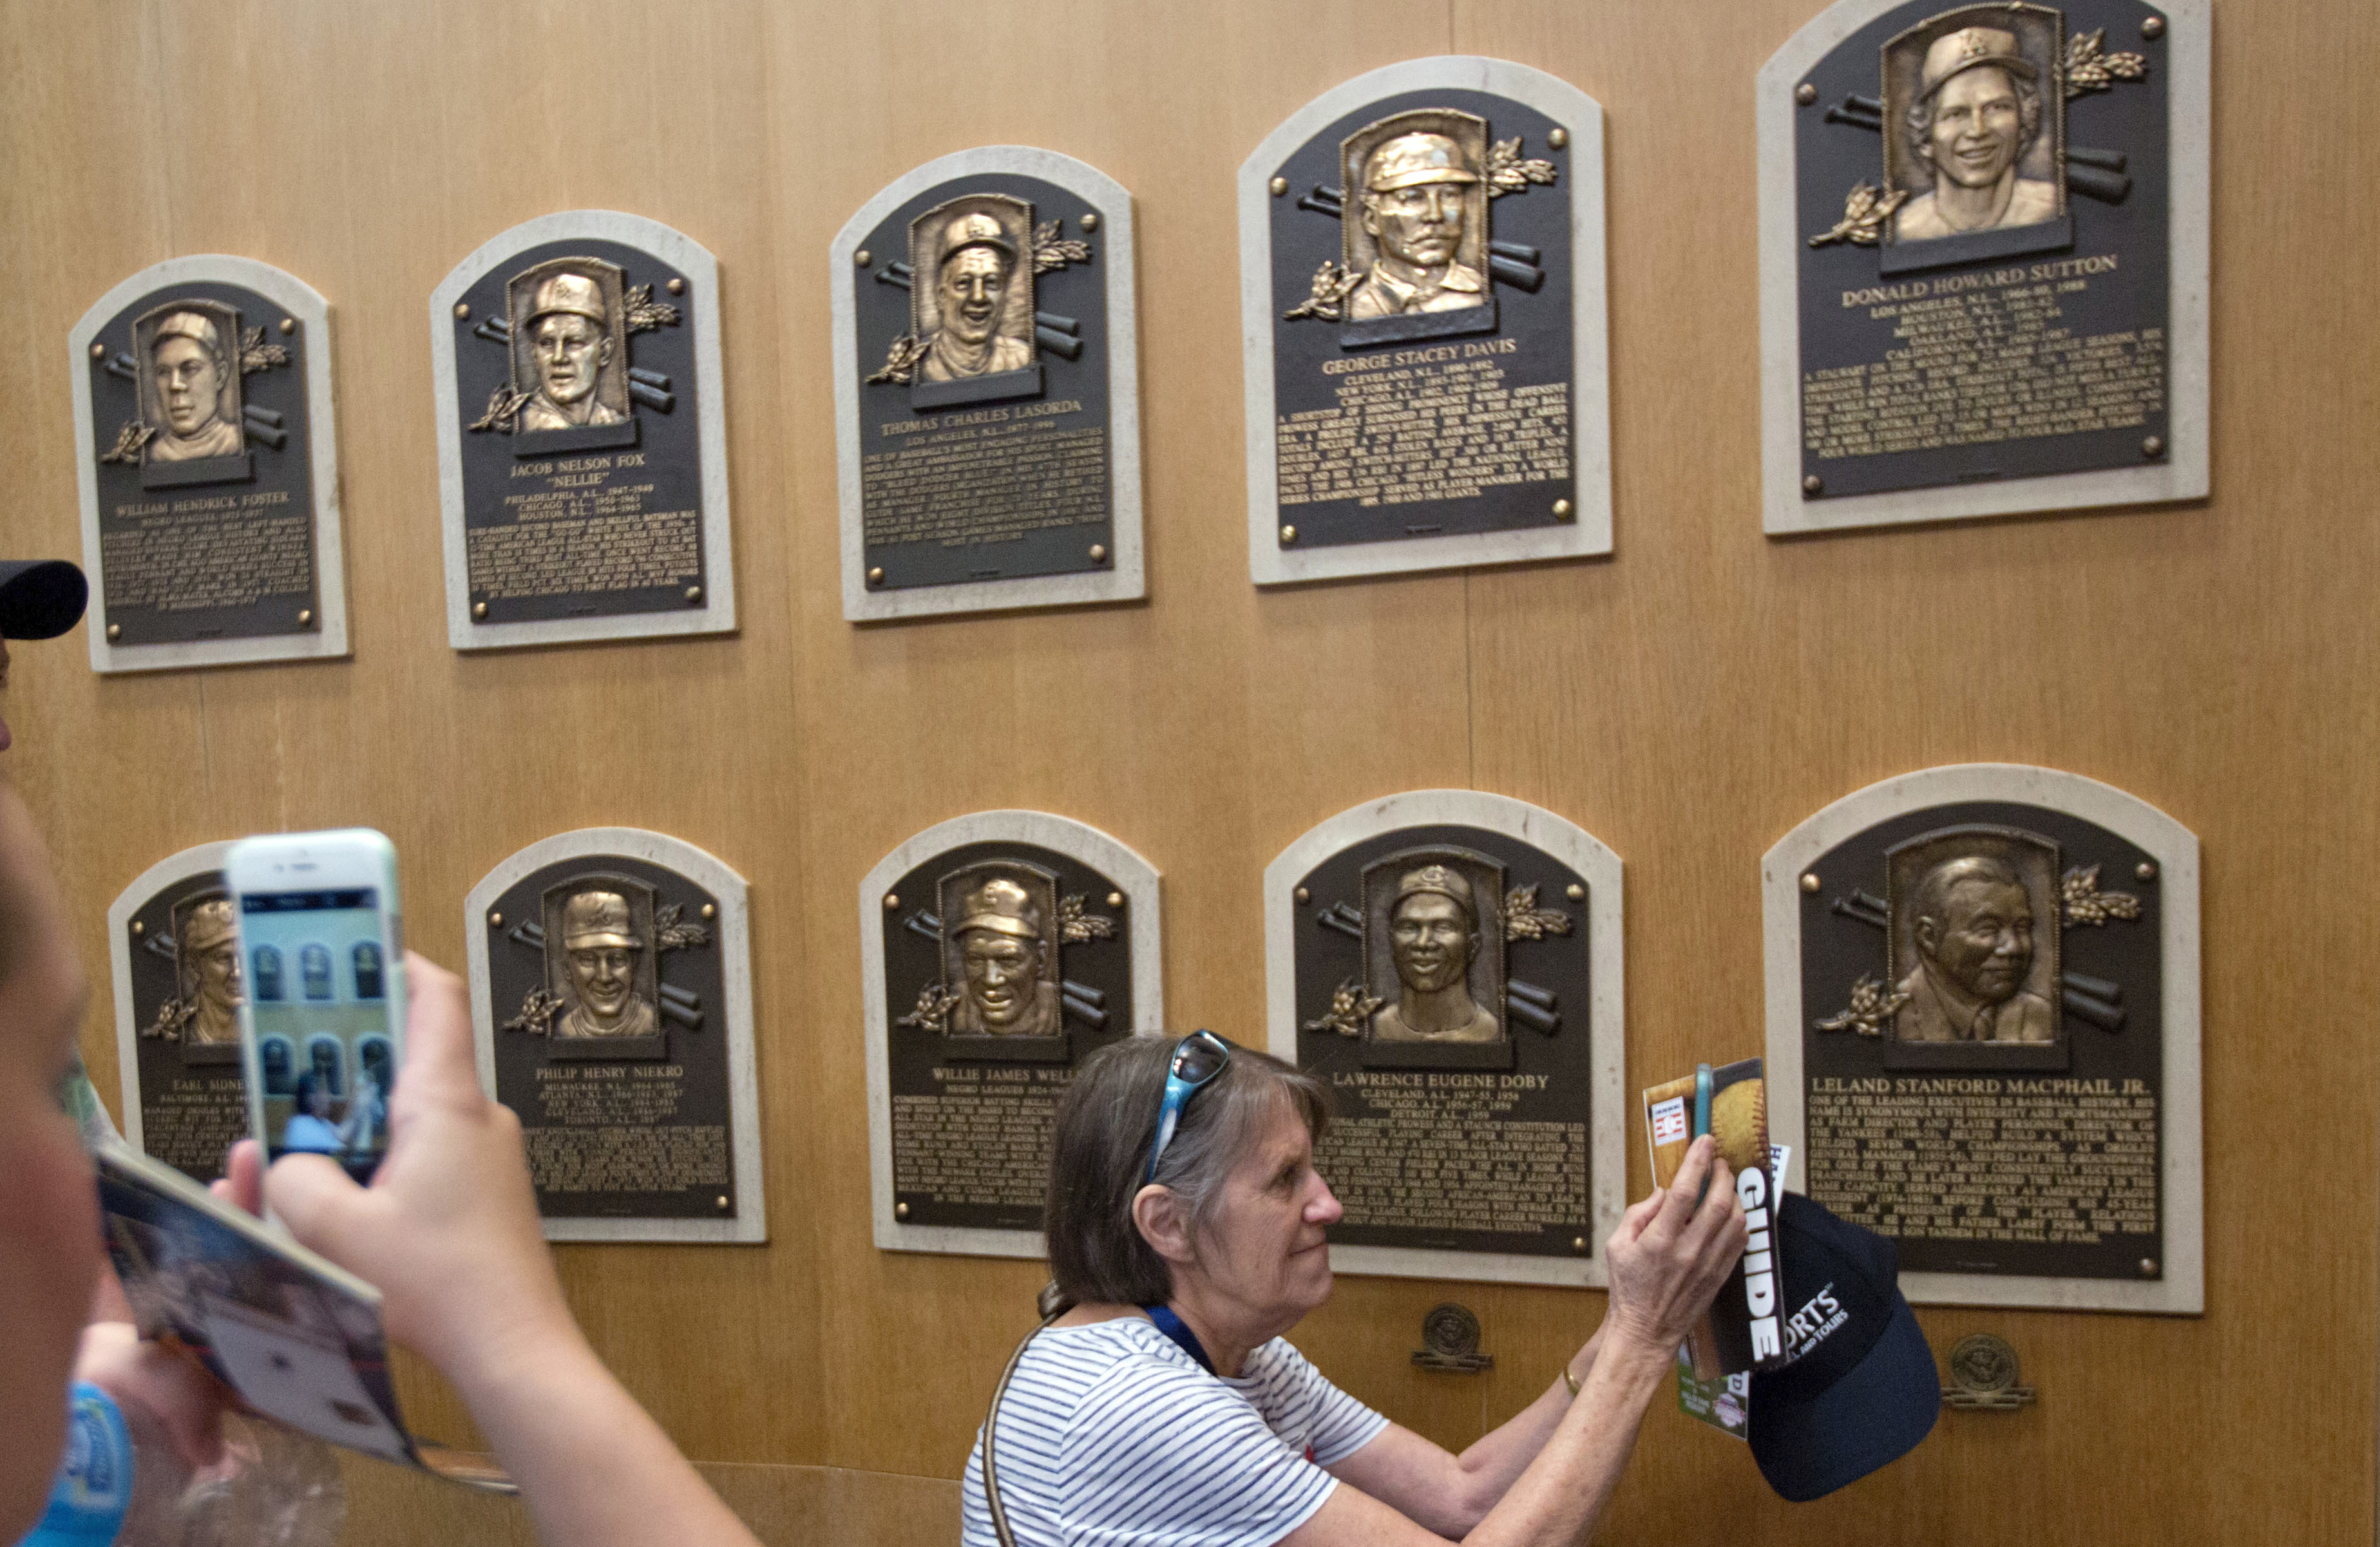 National Baseball Hall of Fame and Museum - You name the stat and